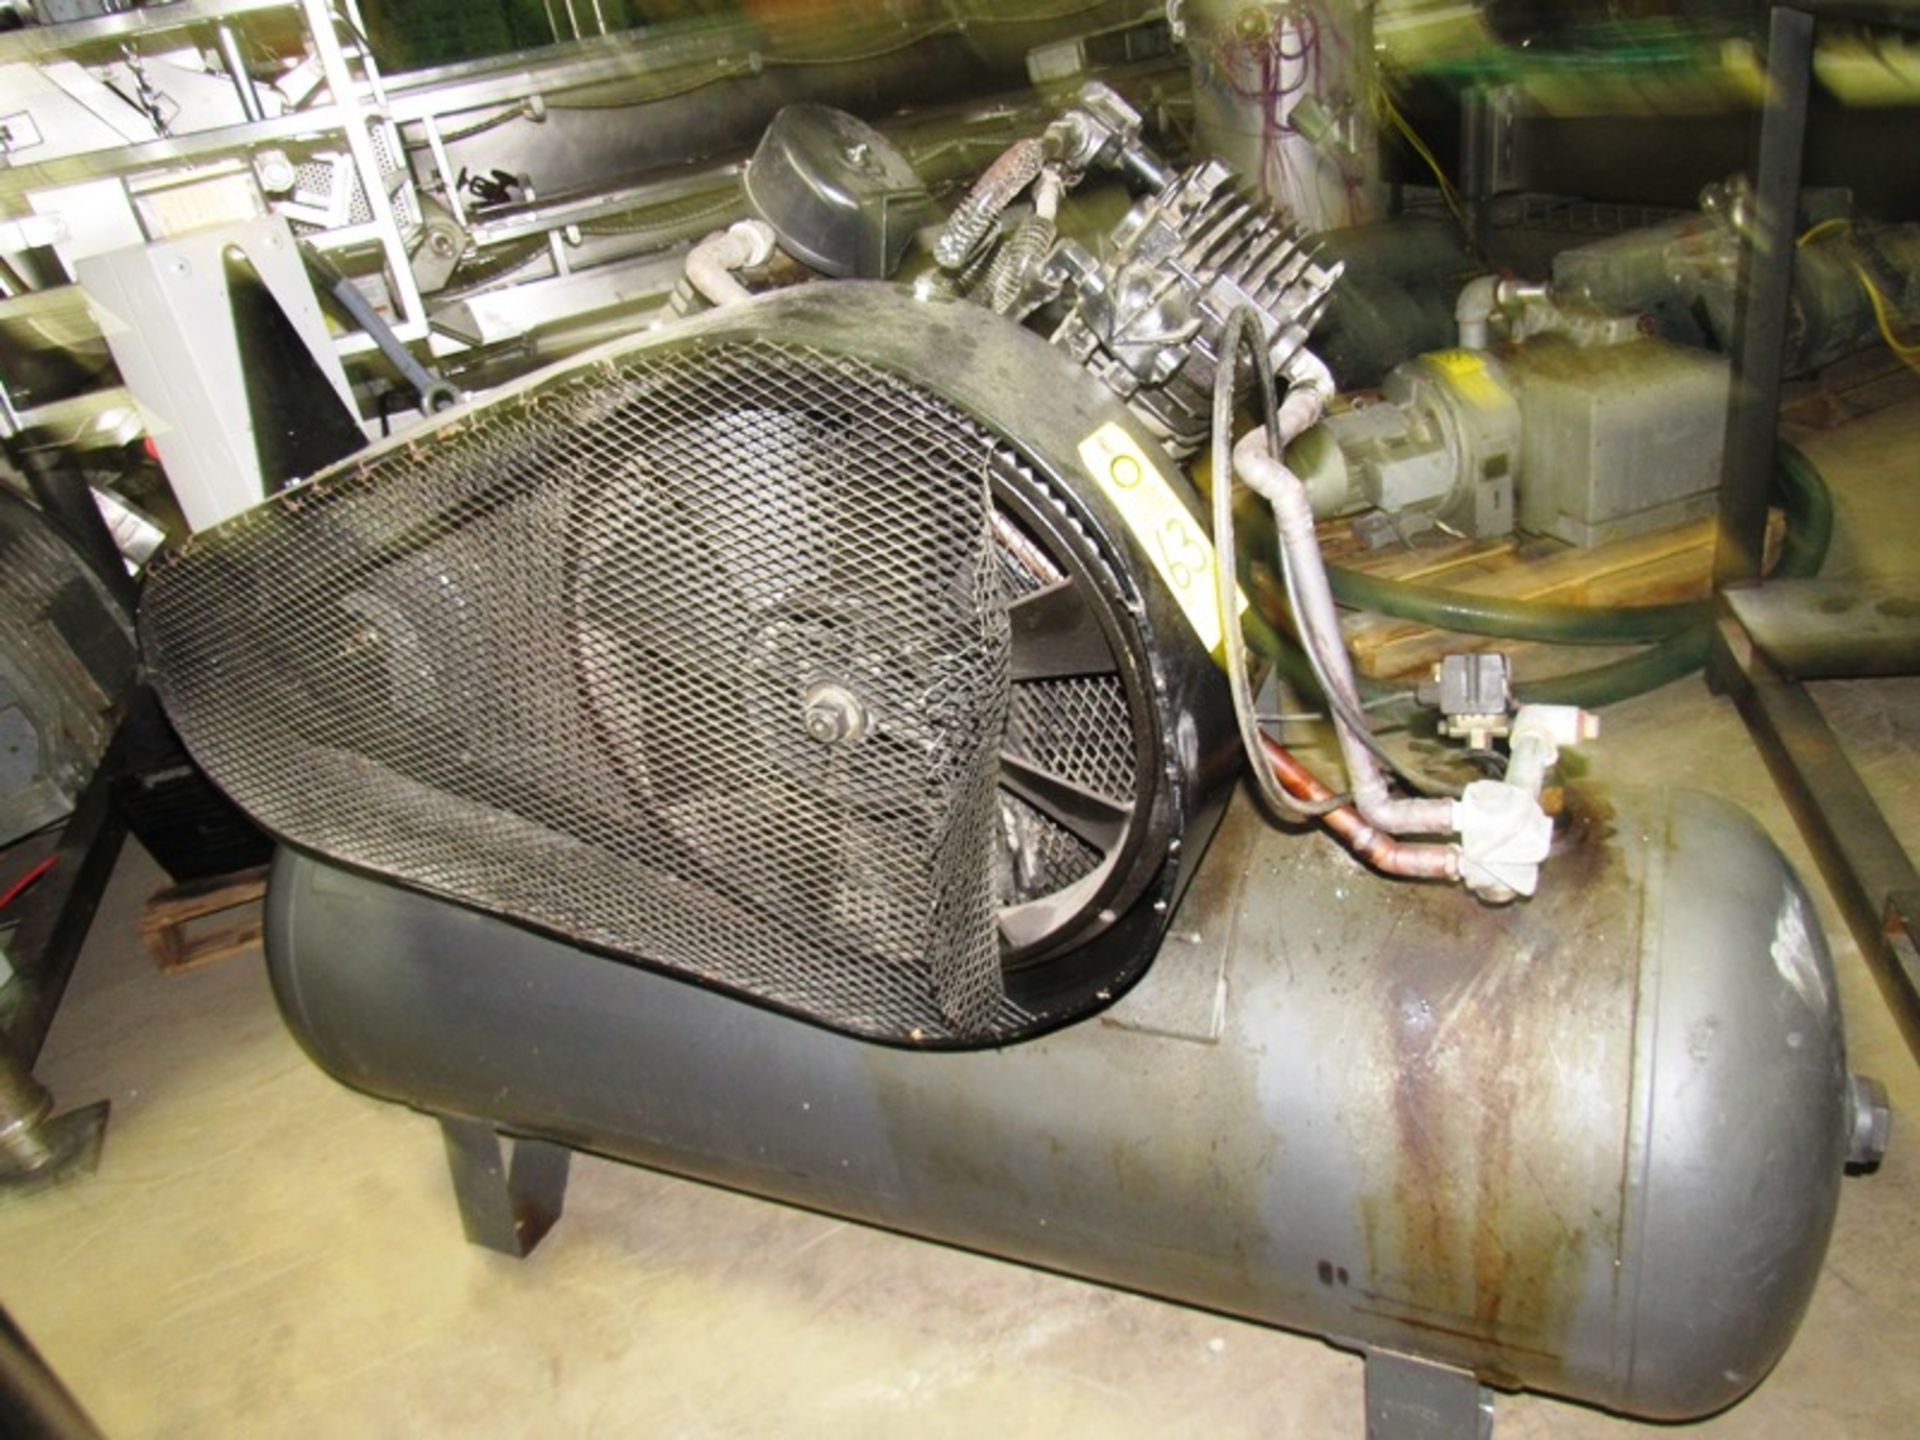 Schulz Mdl. 80BR 2 Stage Air Compressor, 15 h.p., 208/230/460 volts, 3 phase, on holding tank - Image 3 of 7